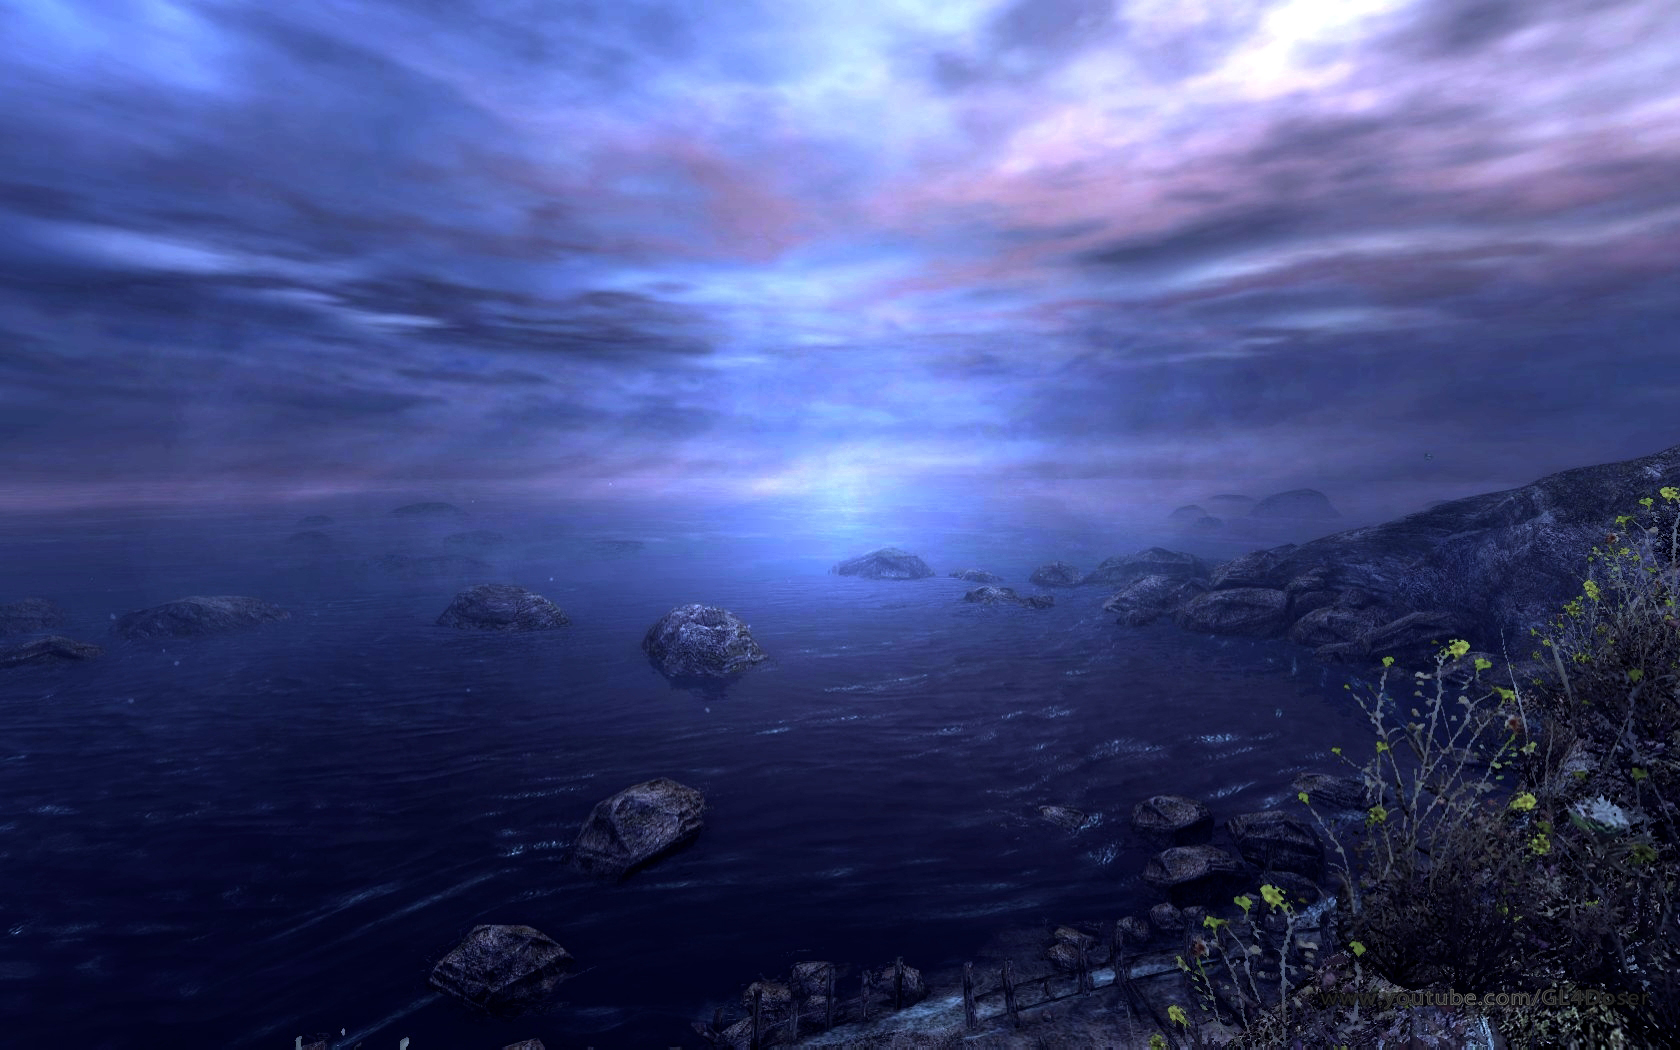 Dear Esther HD Wallpaper Fully recolored by GL4D